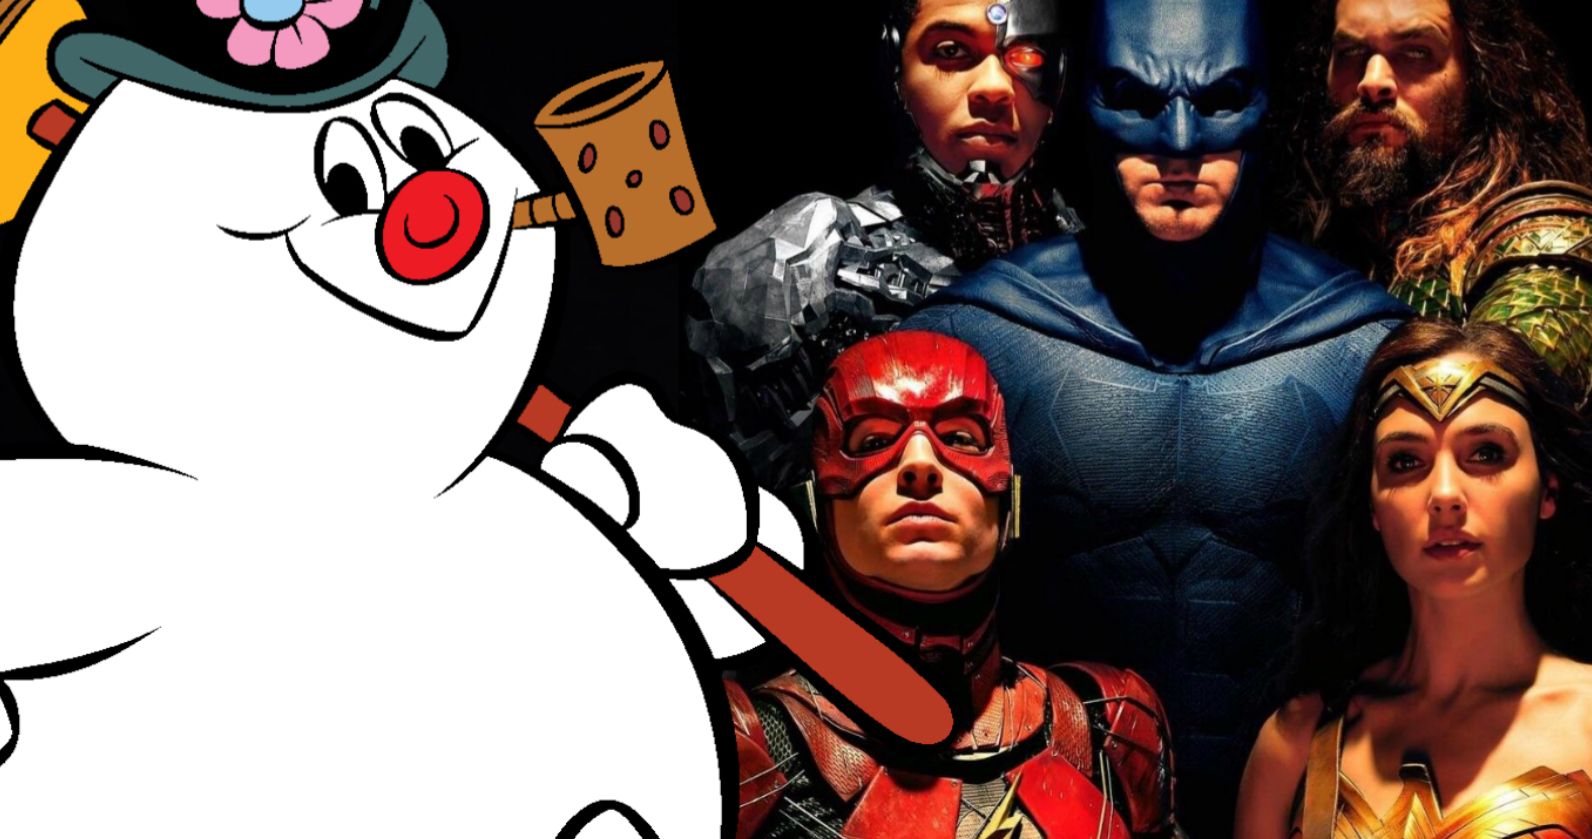 Jason Momoa Claims Fake Frosty News Was Used to Distract from Justice League Case